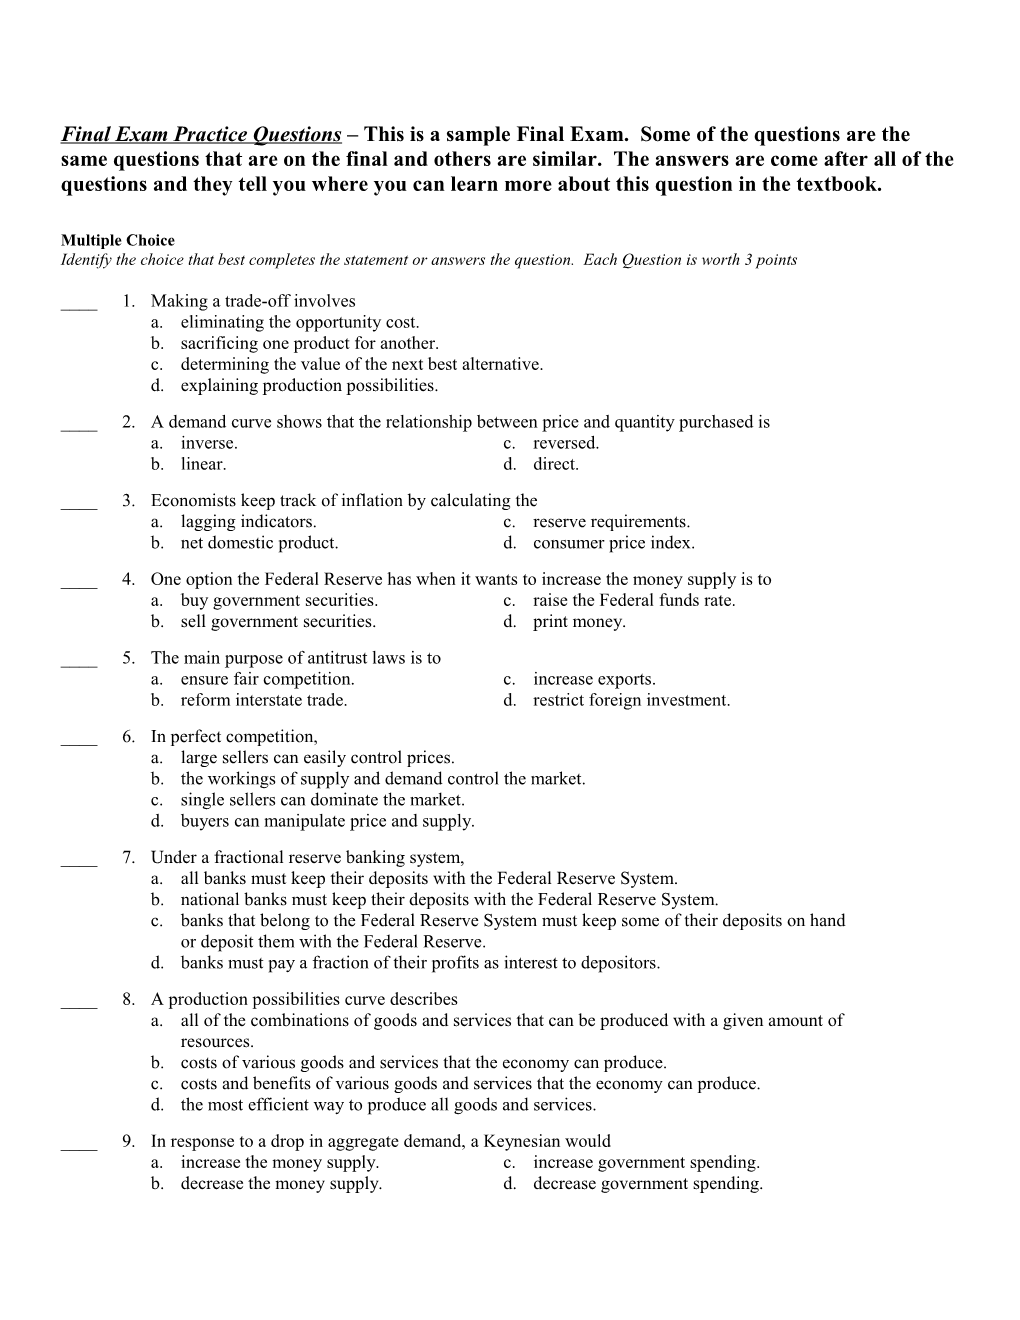 Final Exam Practice Questions This Is a Sample Final Exam. Some of the Questions Are The